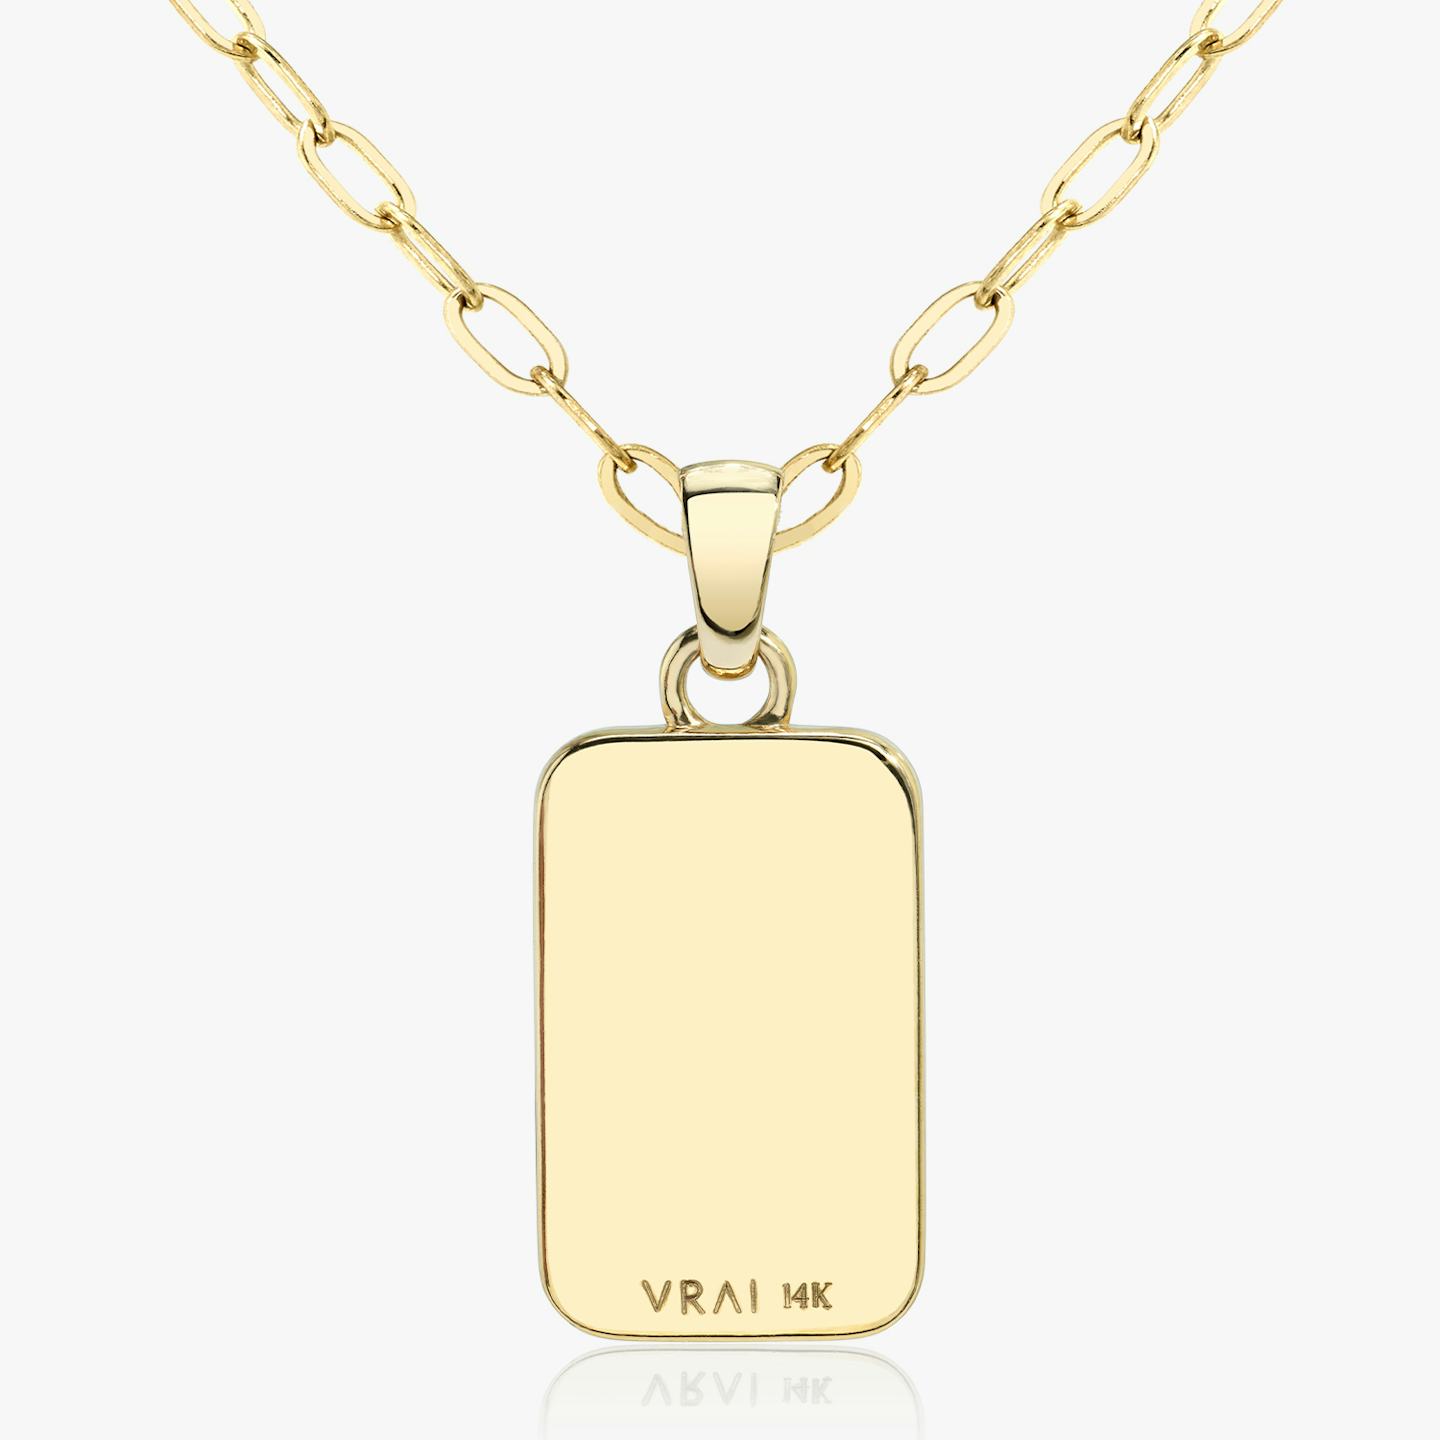 Currency Necklace | Baguette | 14k | 18k Yellow Gold | Chain length: 20